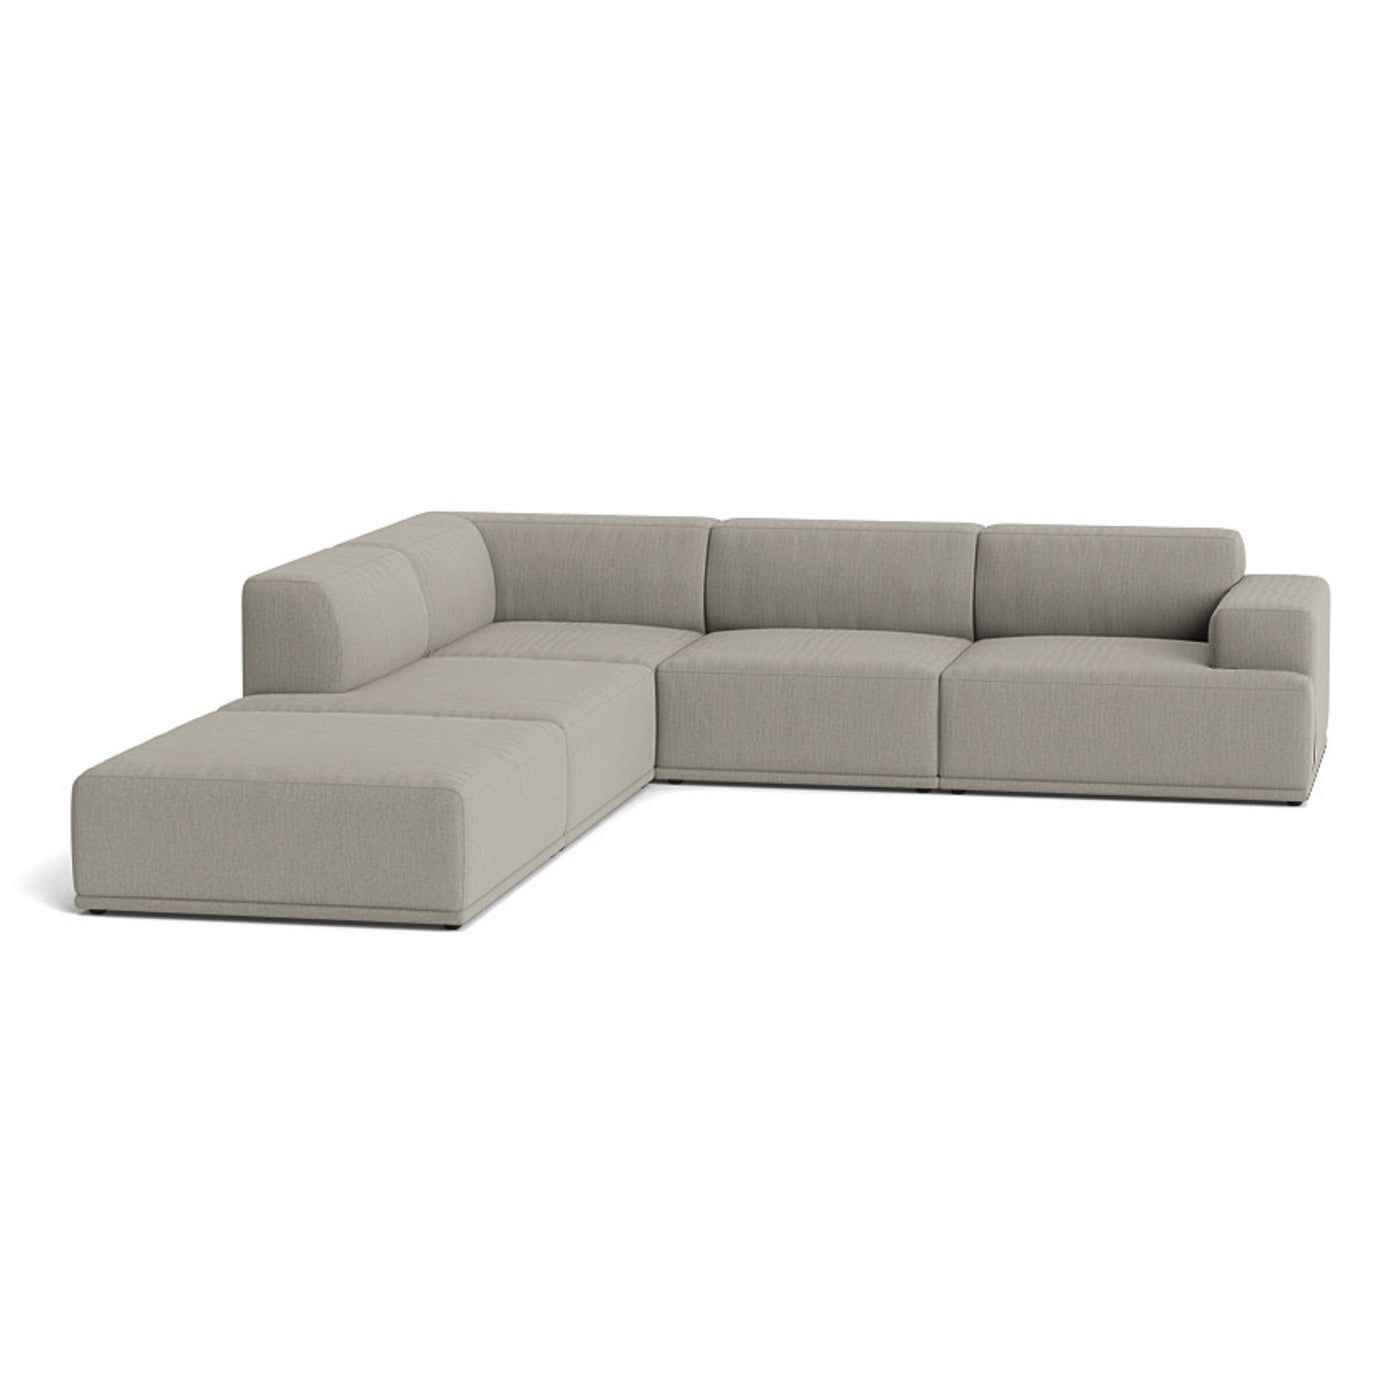 Muuto Connect Soft Modular Corner Sofa, configuration 1. Made-to-order from someday designs. #colour_re-wool-218